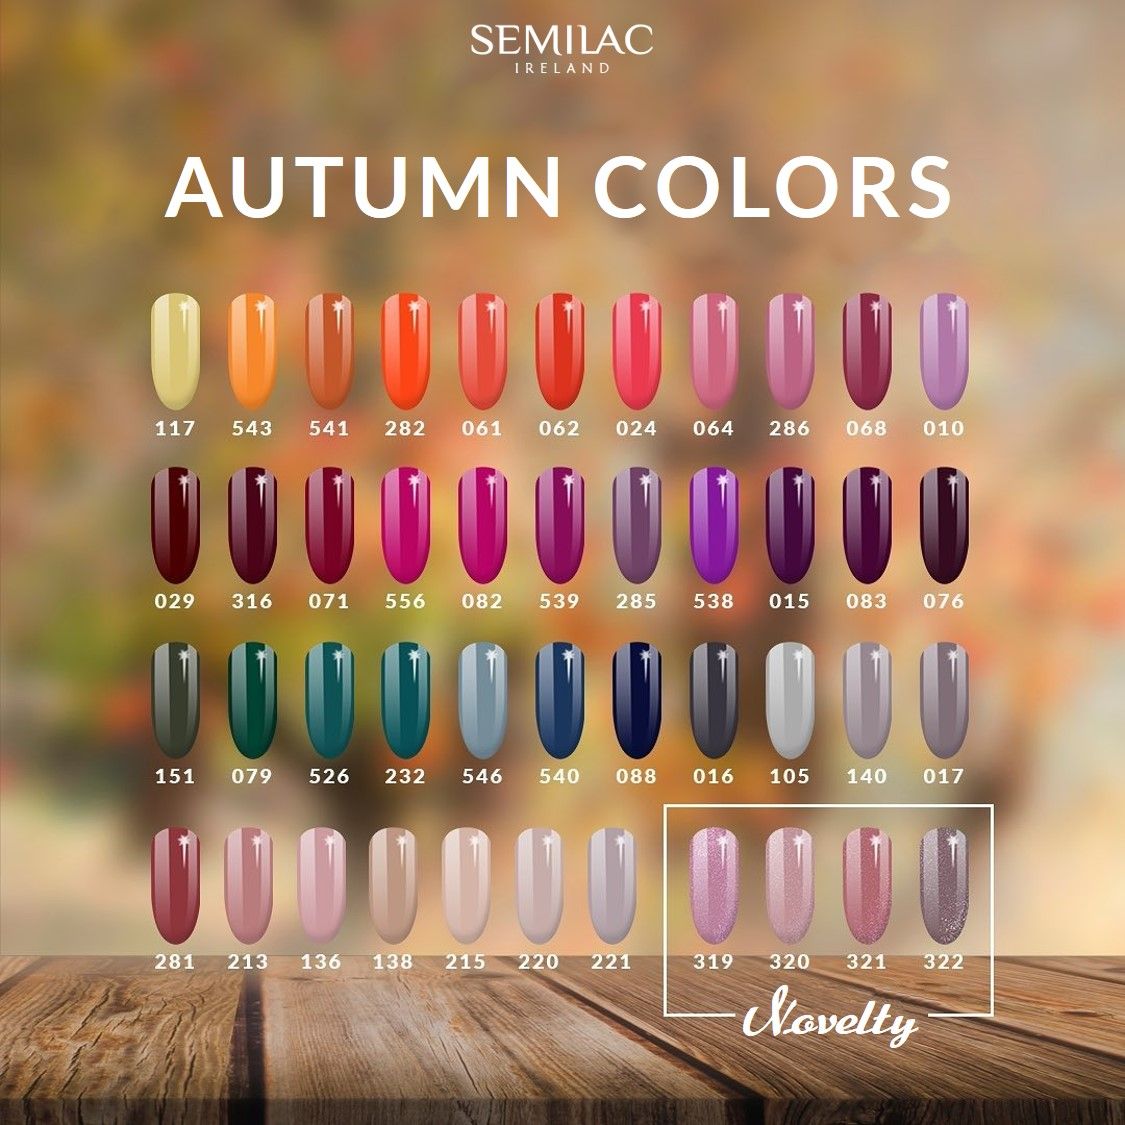 Trendy colors of nails for autumn 2020